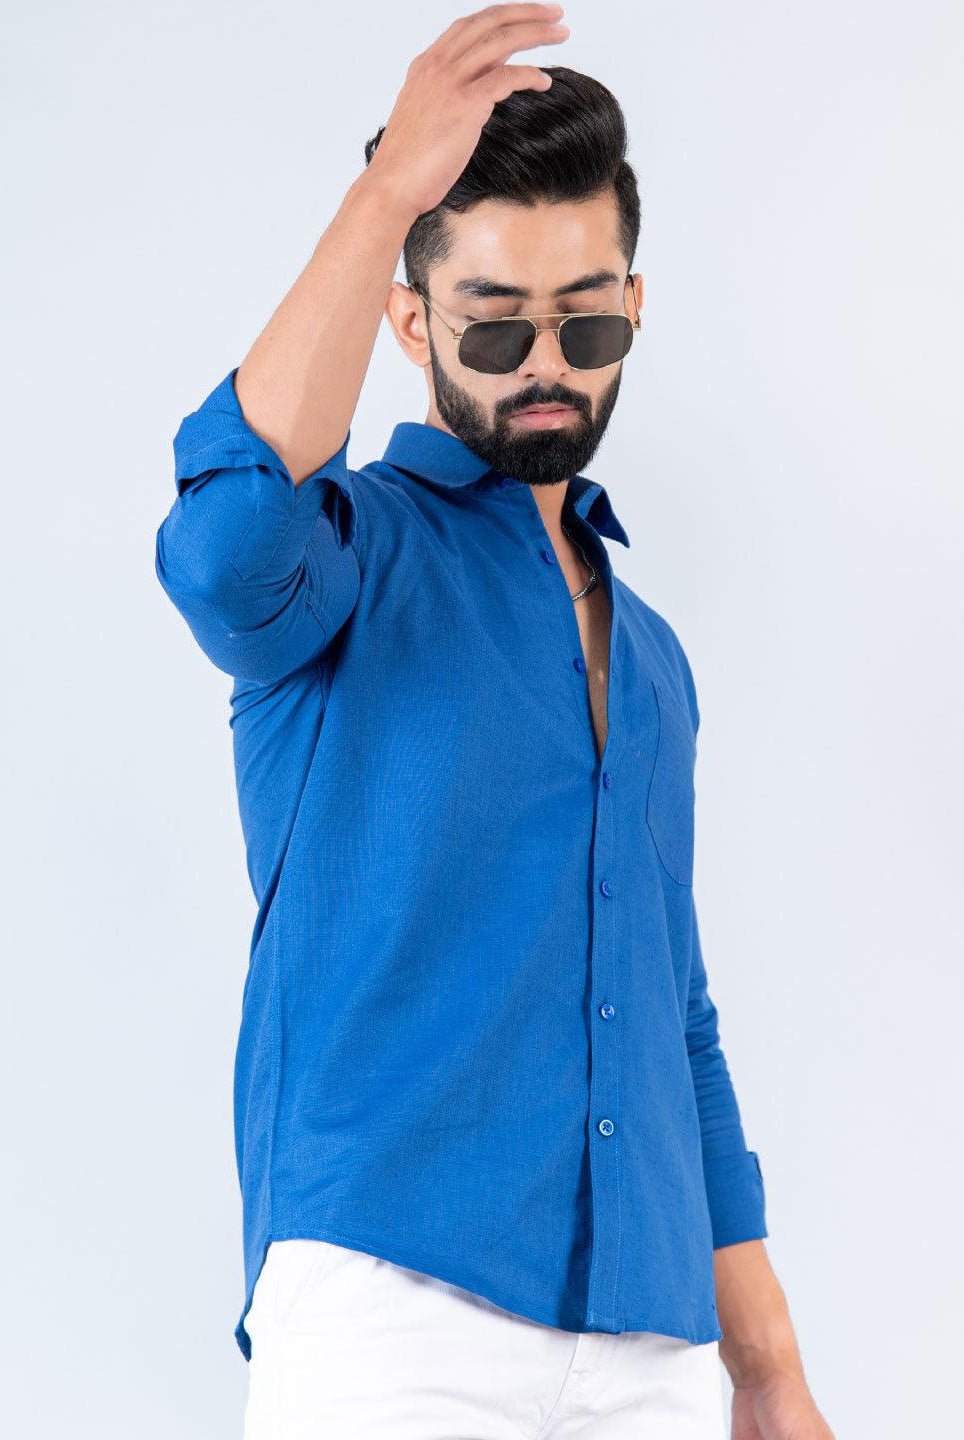 Solid Blue Full Sleeves Cotton Shirt - Tistabene